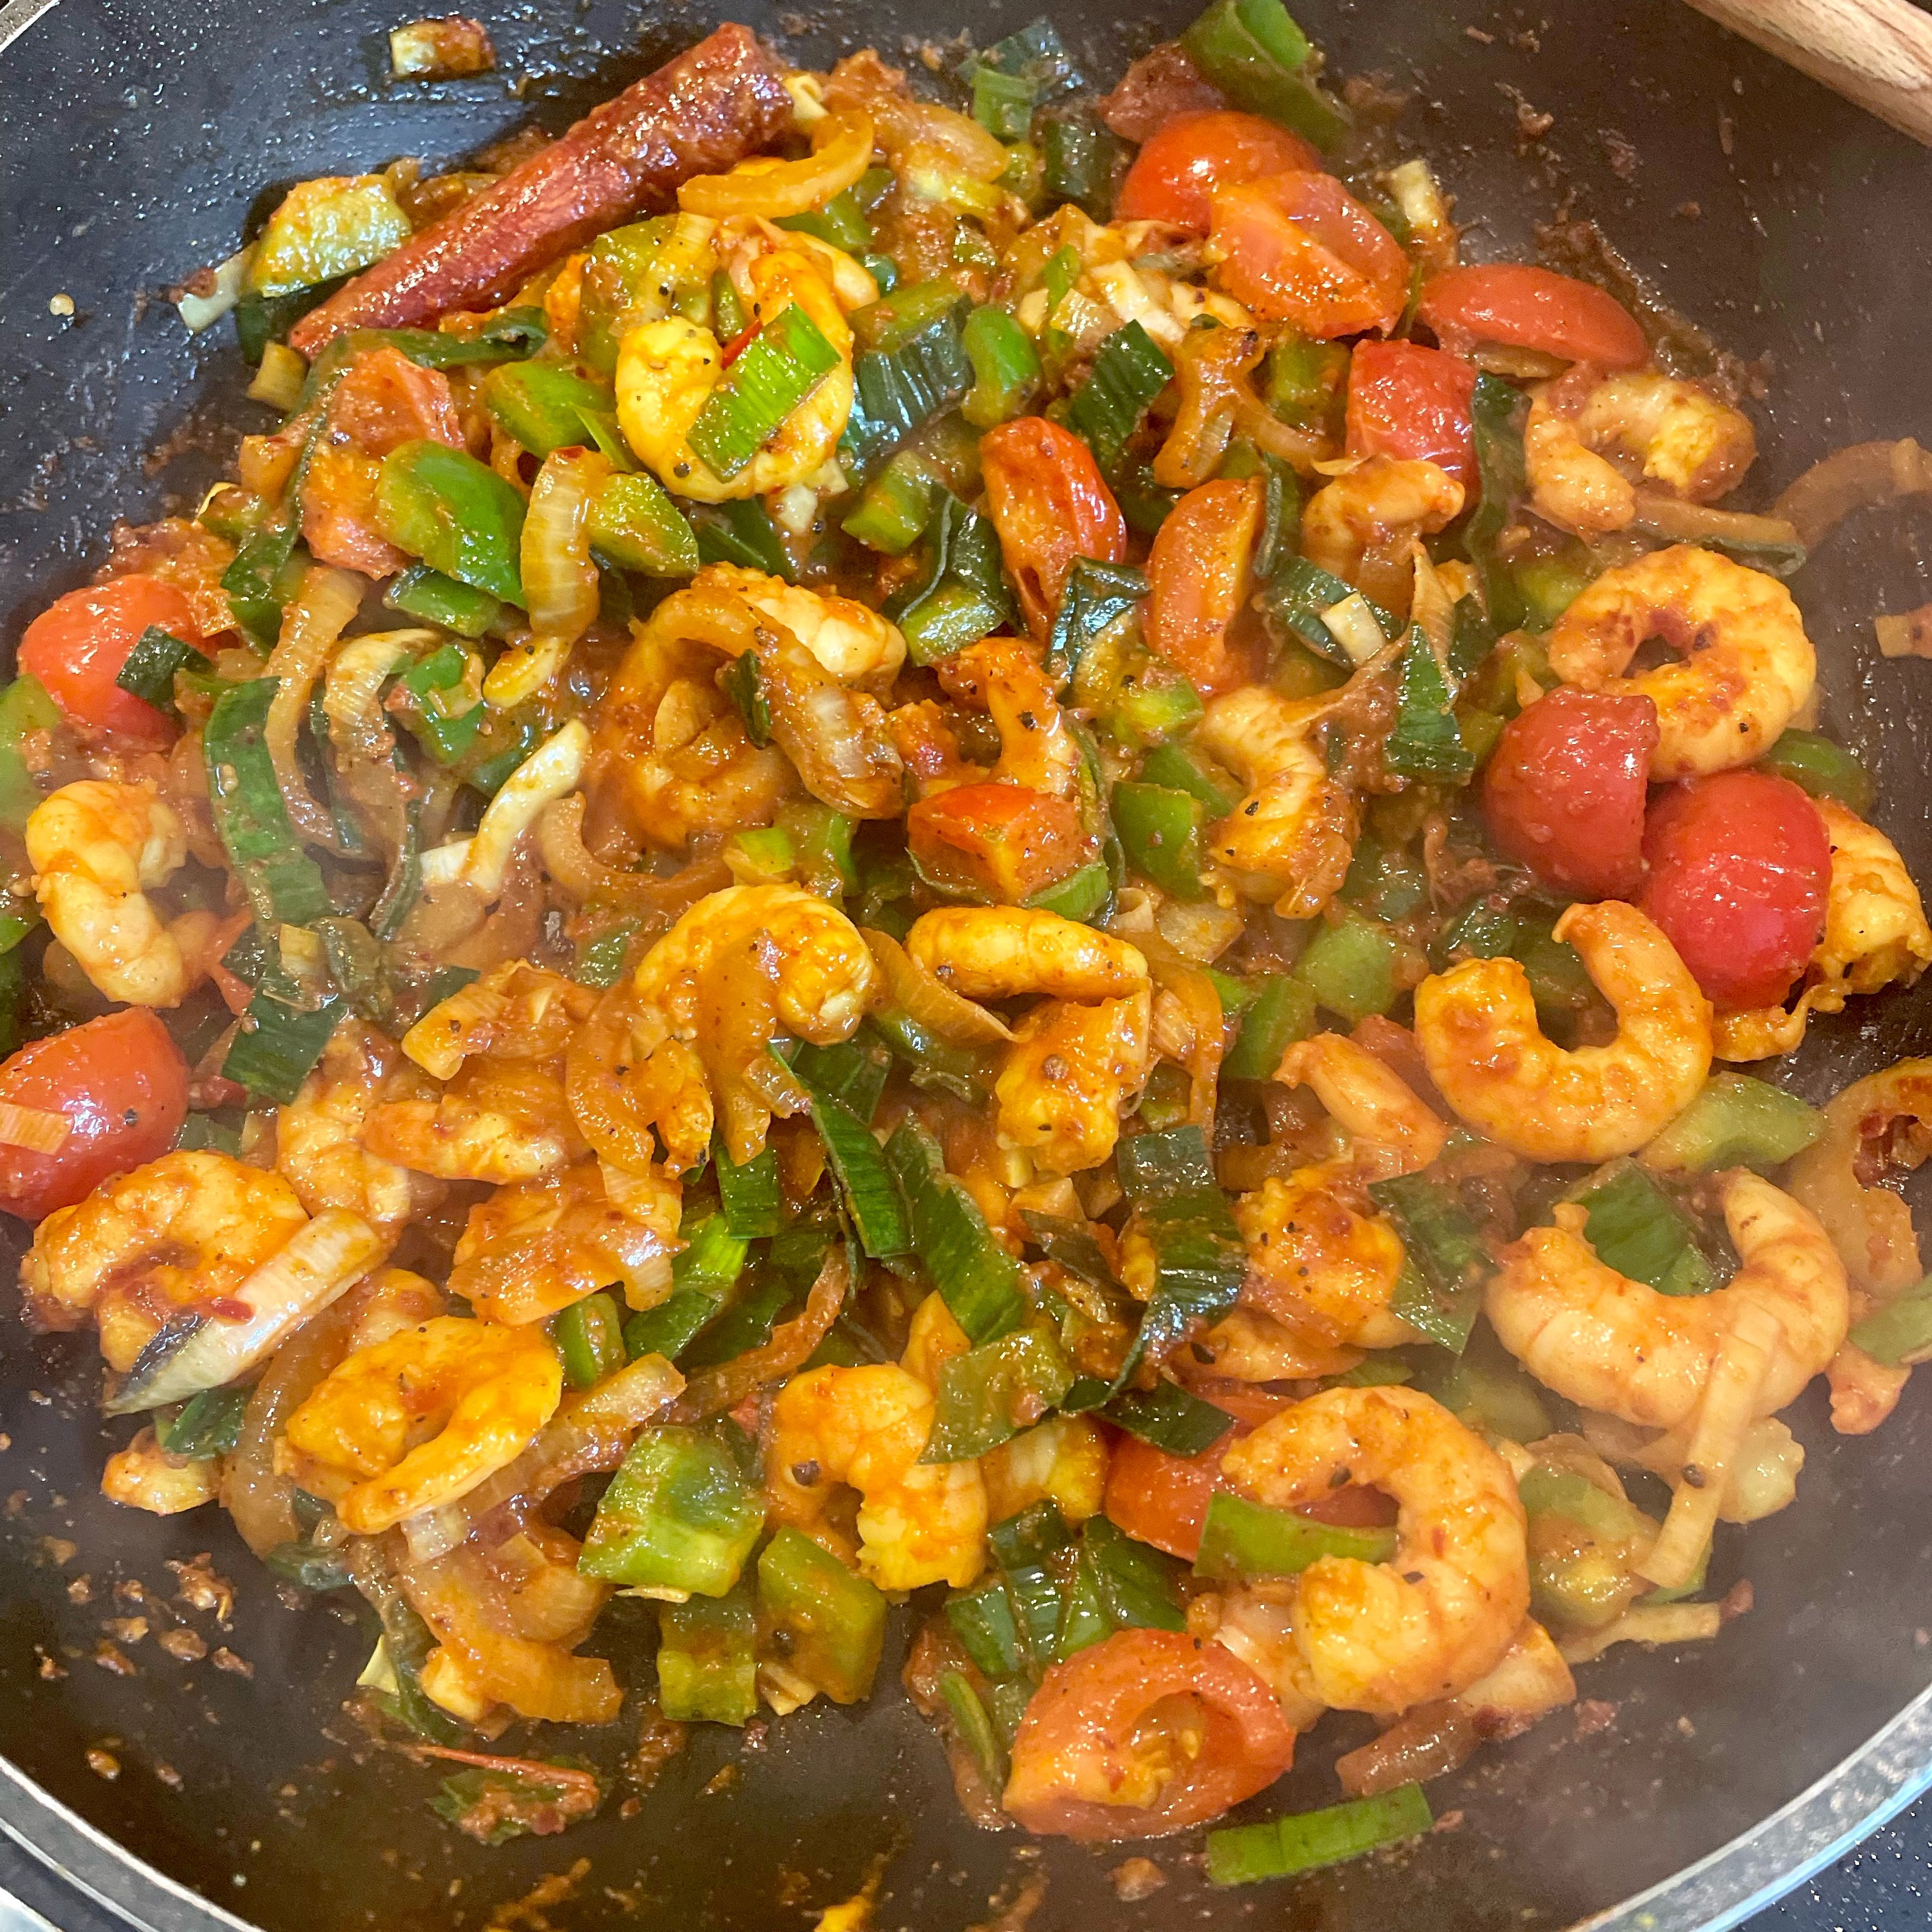 Add sugar, chili paste, soy sauce and tomato sauce. Fry for a minute, then add vegetables. Fry for about five minutes. Finally add prawns, mix and cook for another three minutes.